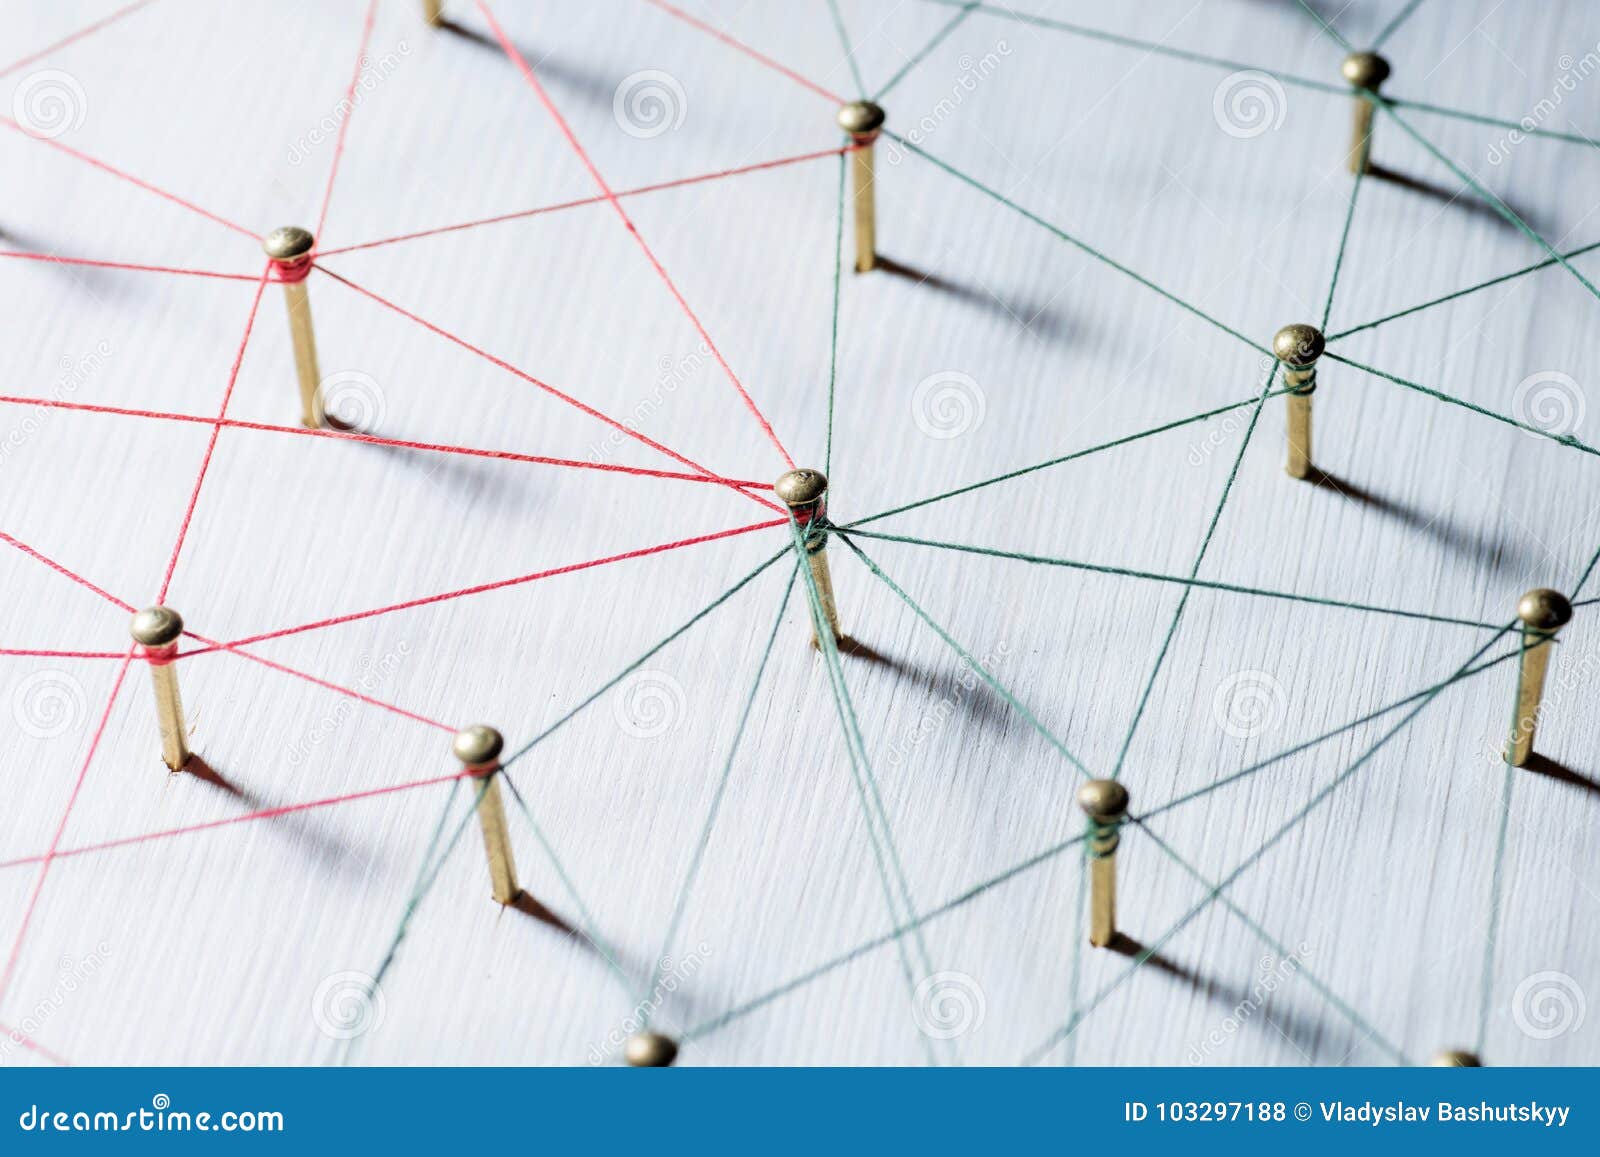 linking entities. network, networking, social media, connectivity, internet communication abstract. web of thin thread